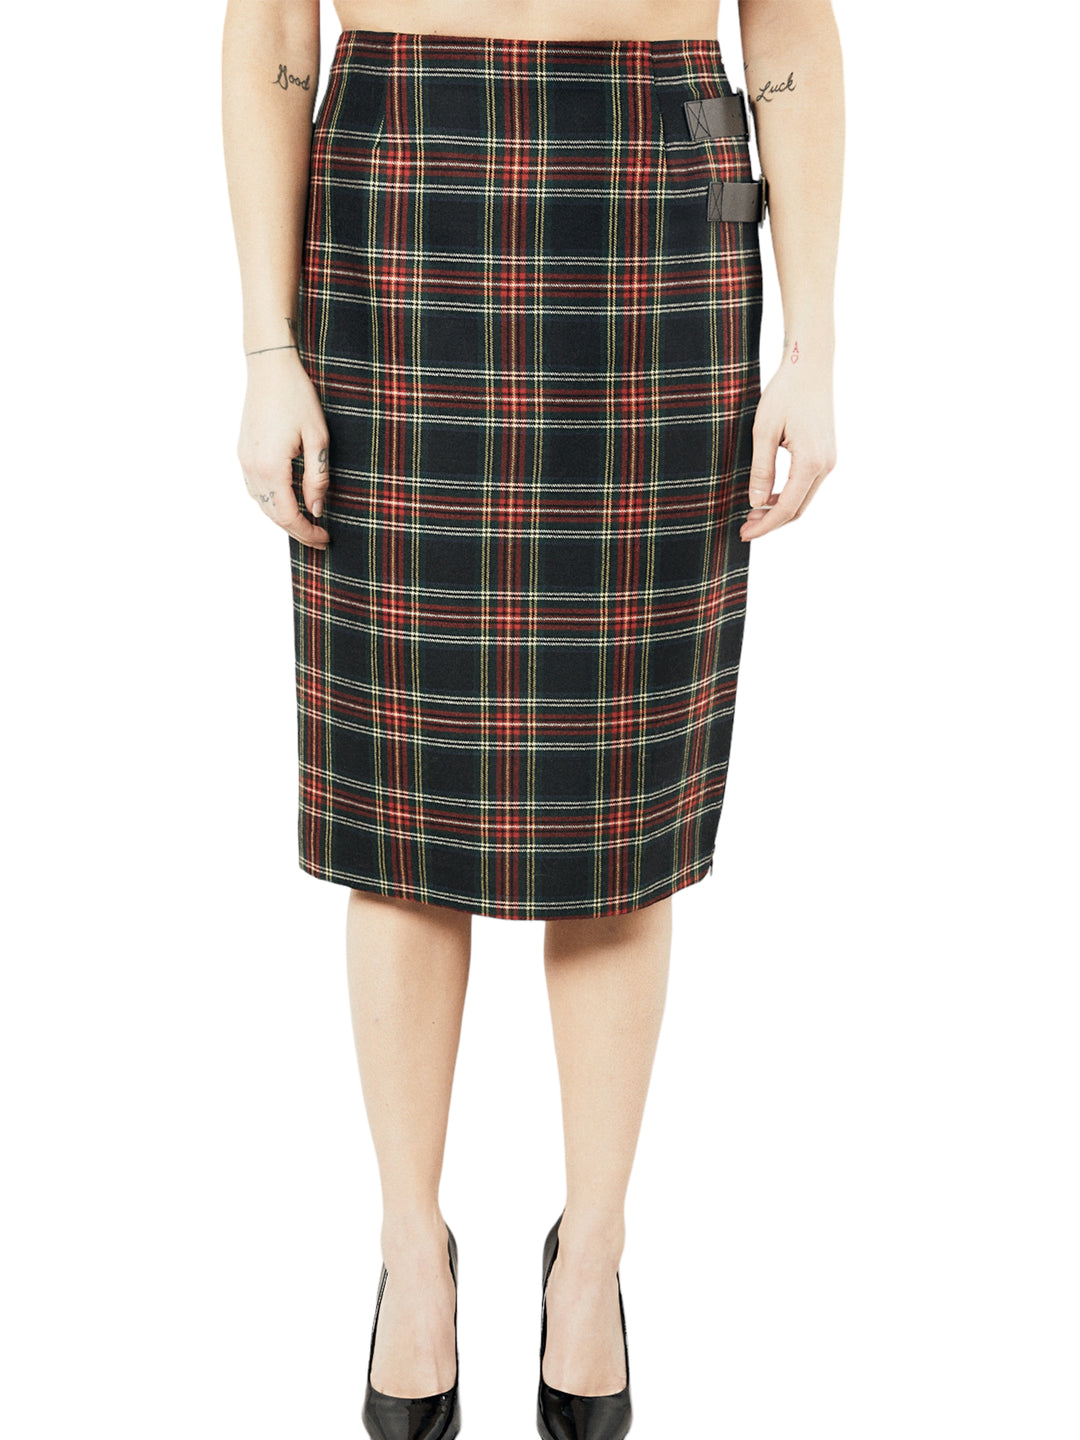 Pencil Skirt in Plaid (75% OFF)